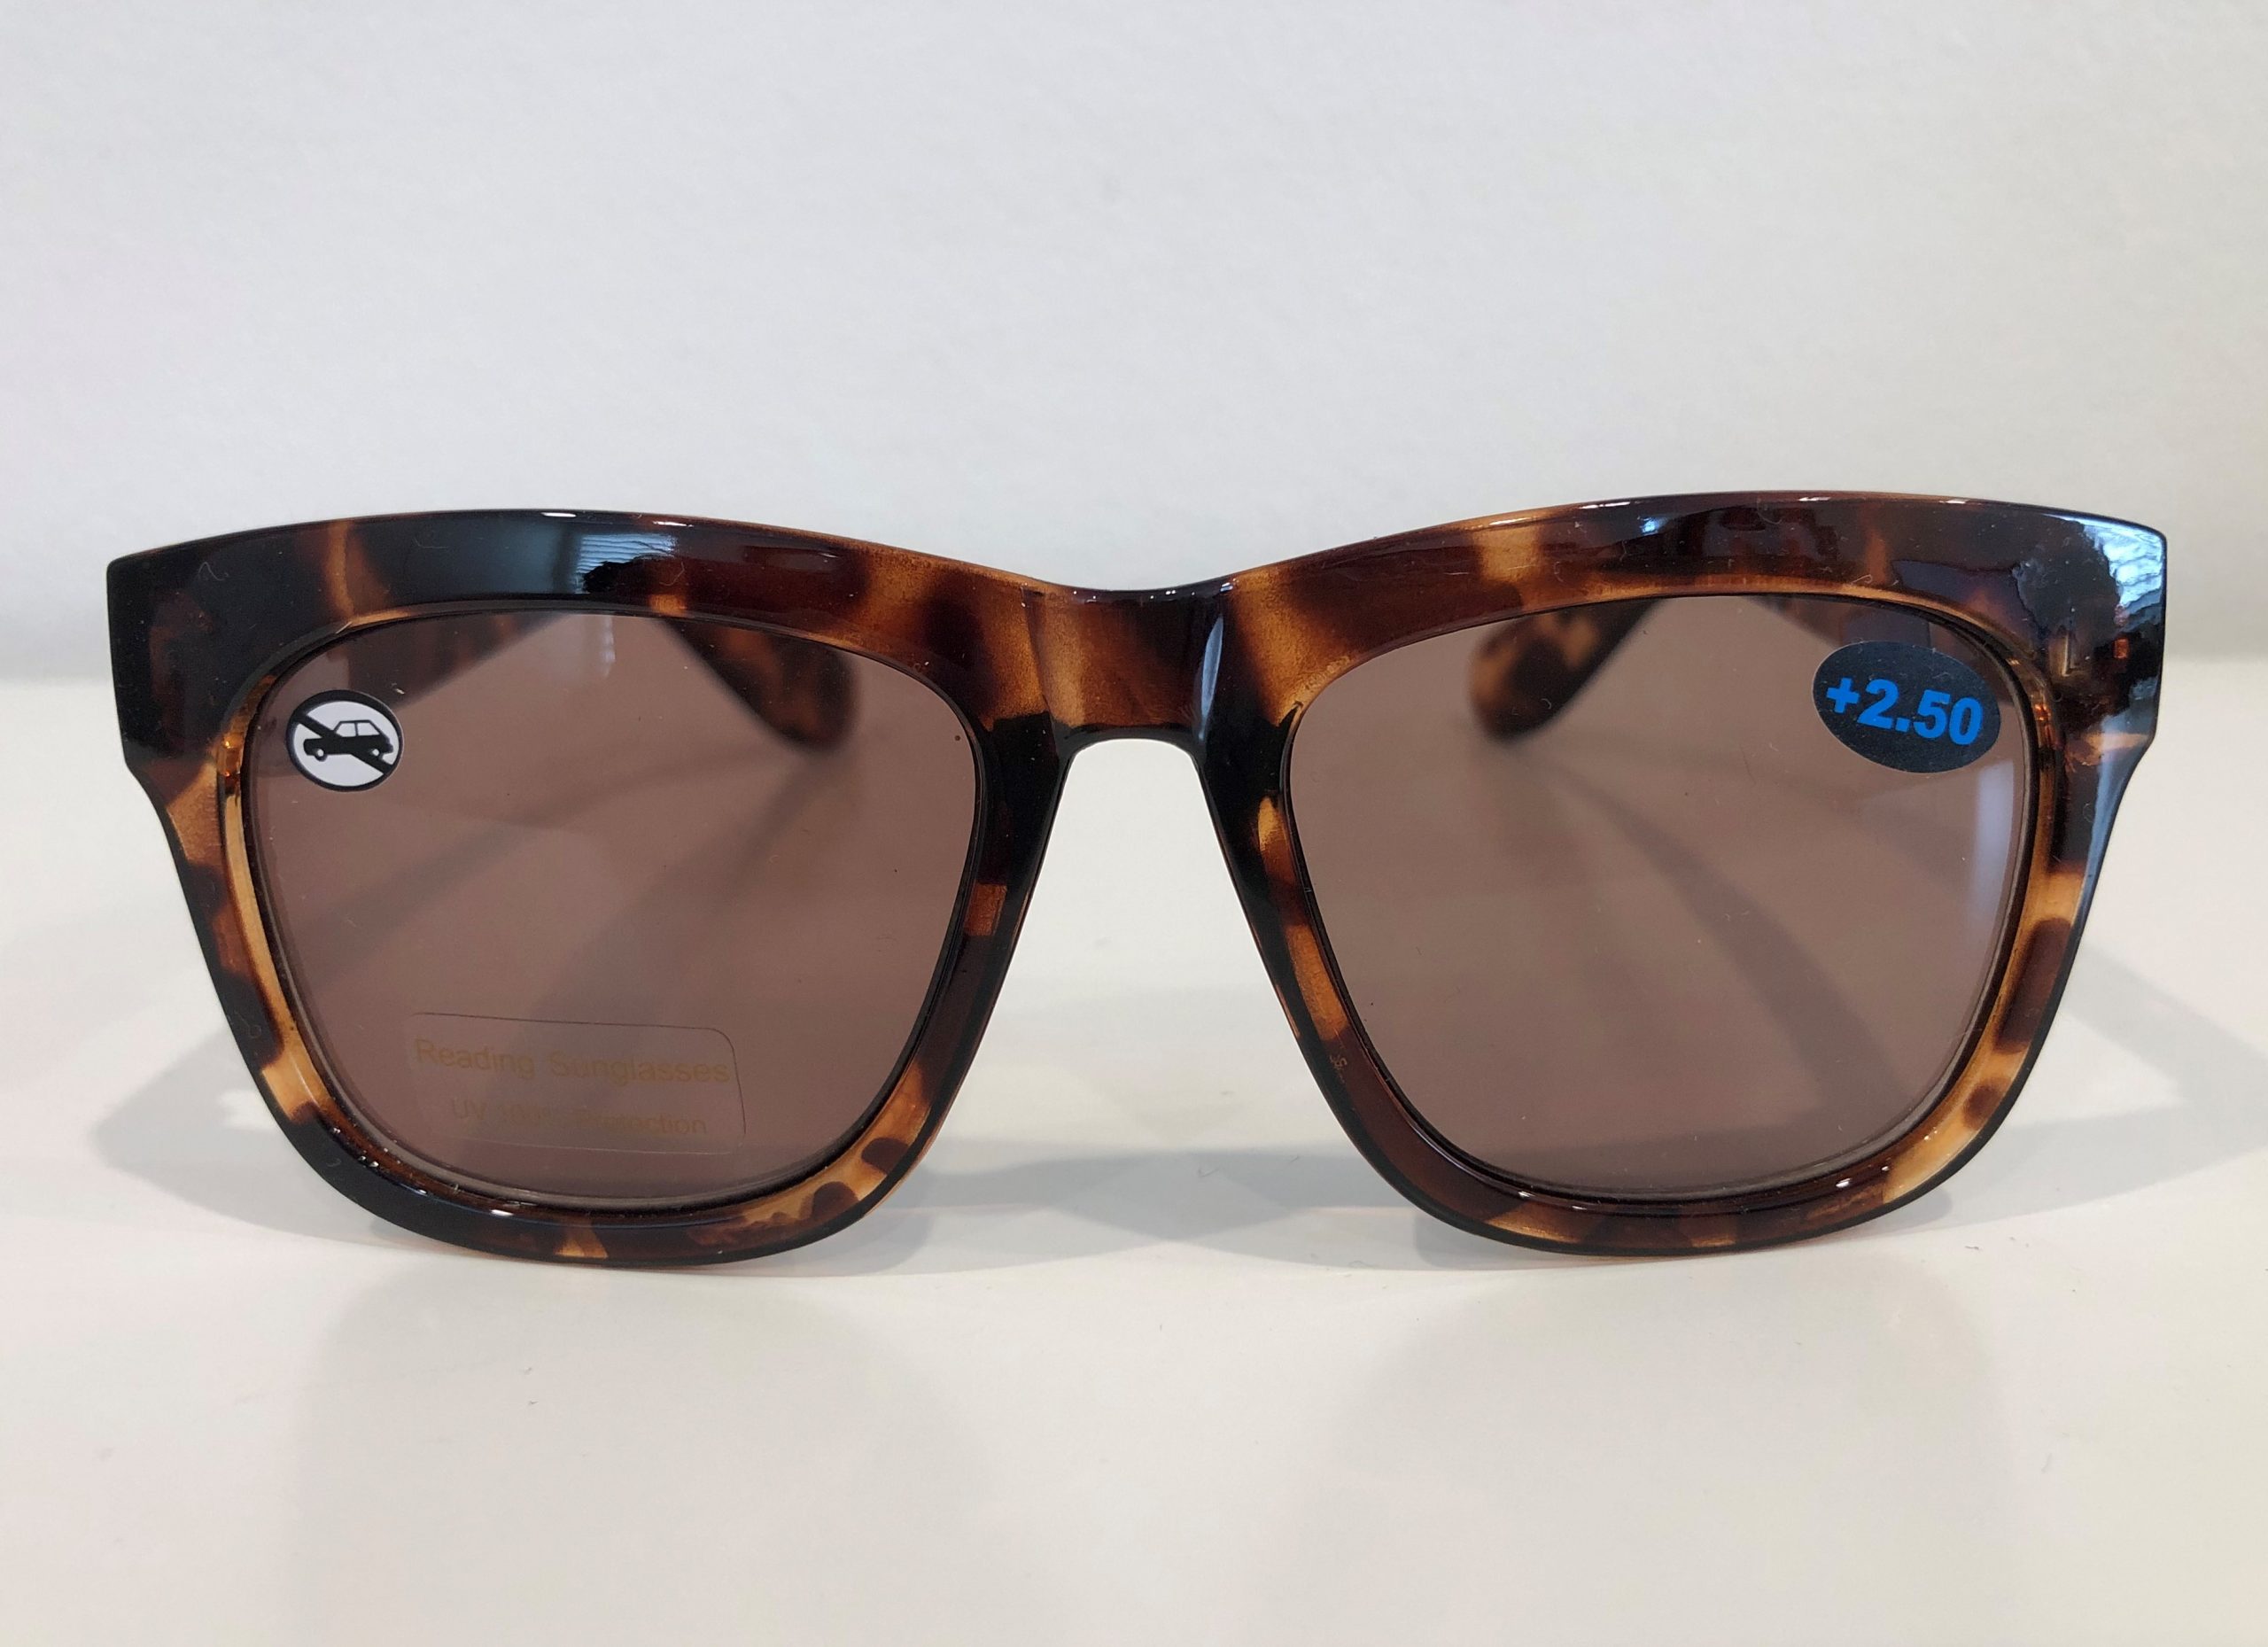 Magnified Reading Sunglasses 9023 BROWN - Magnishades